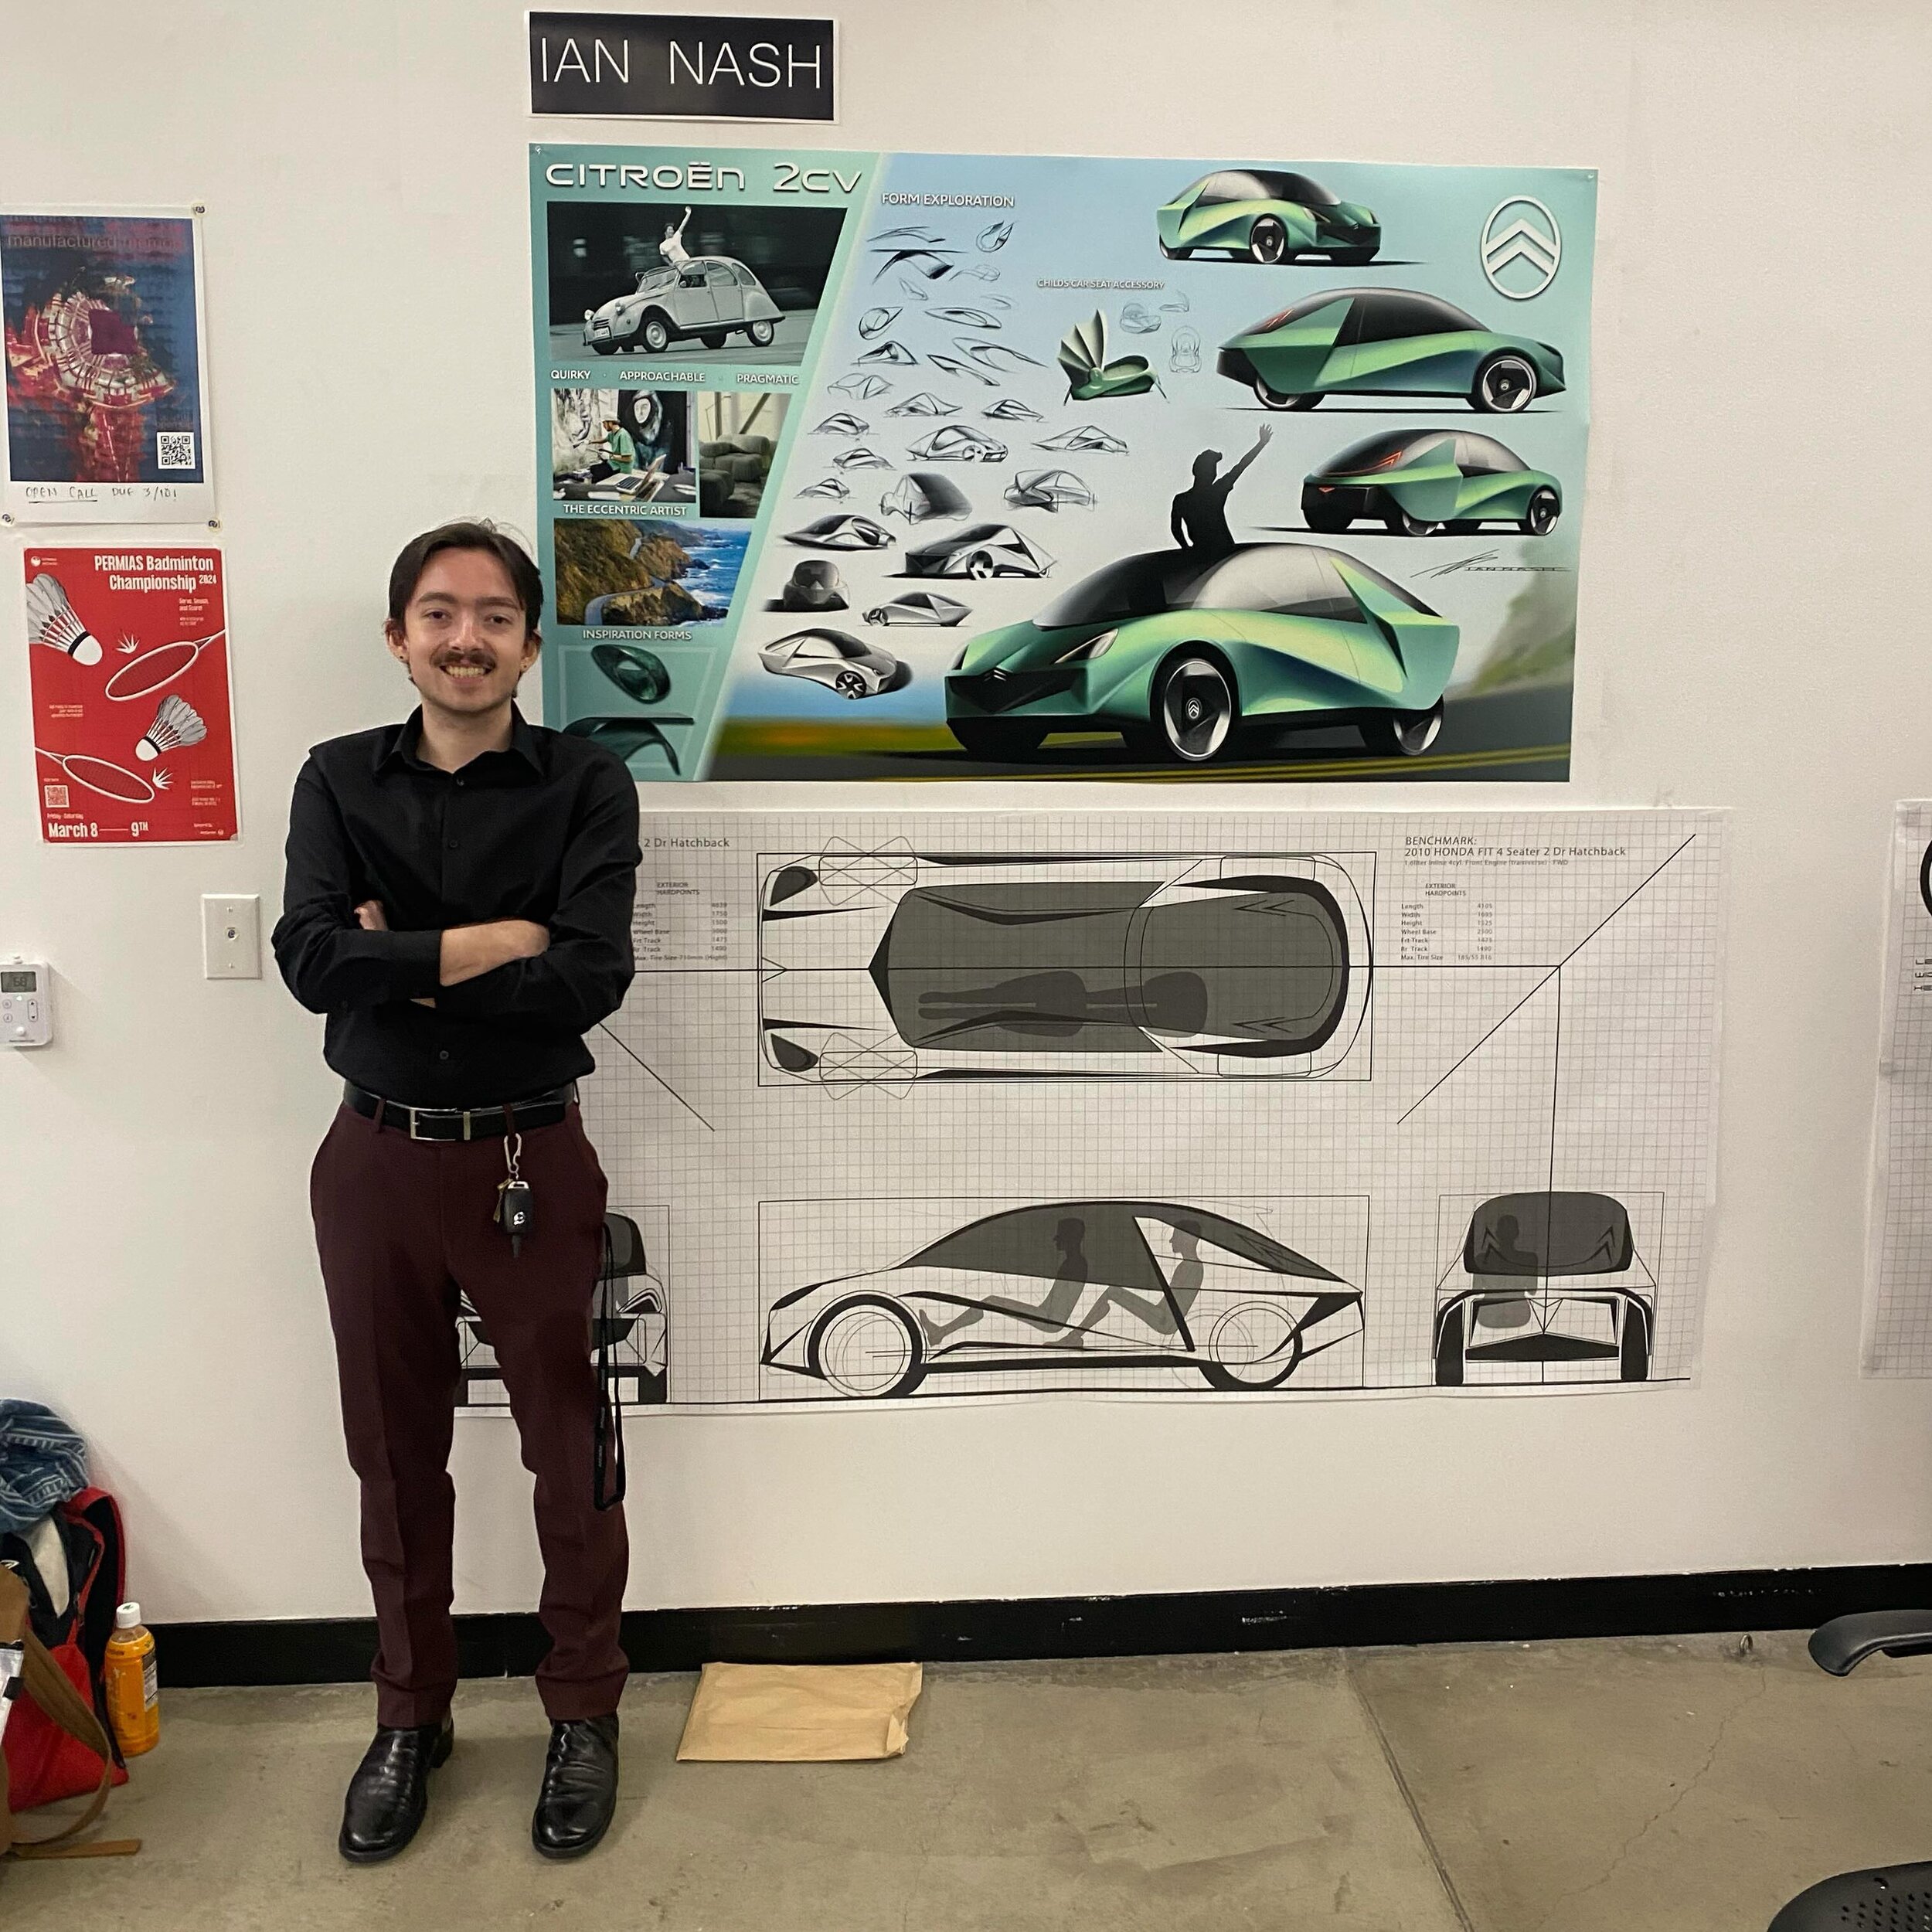 Fast, twisty, sometimes slow, or not like a road at all, but he is driving it. I&rsquo;m so proud of this one and all his work. This is his midterm presentation &mdash;a redesign of the Citro&euml;n 2CV. @artcenteredu #artcentercollegeofdesign #autod